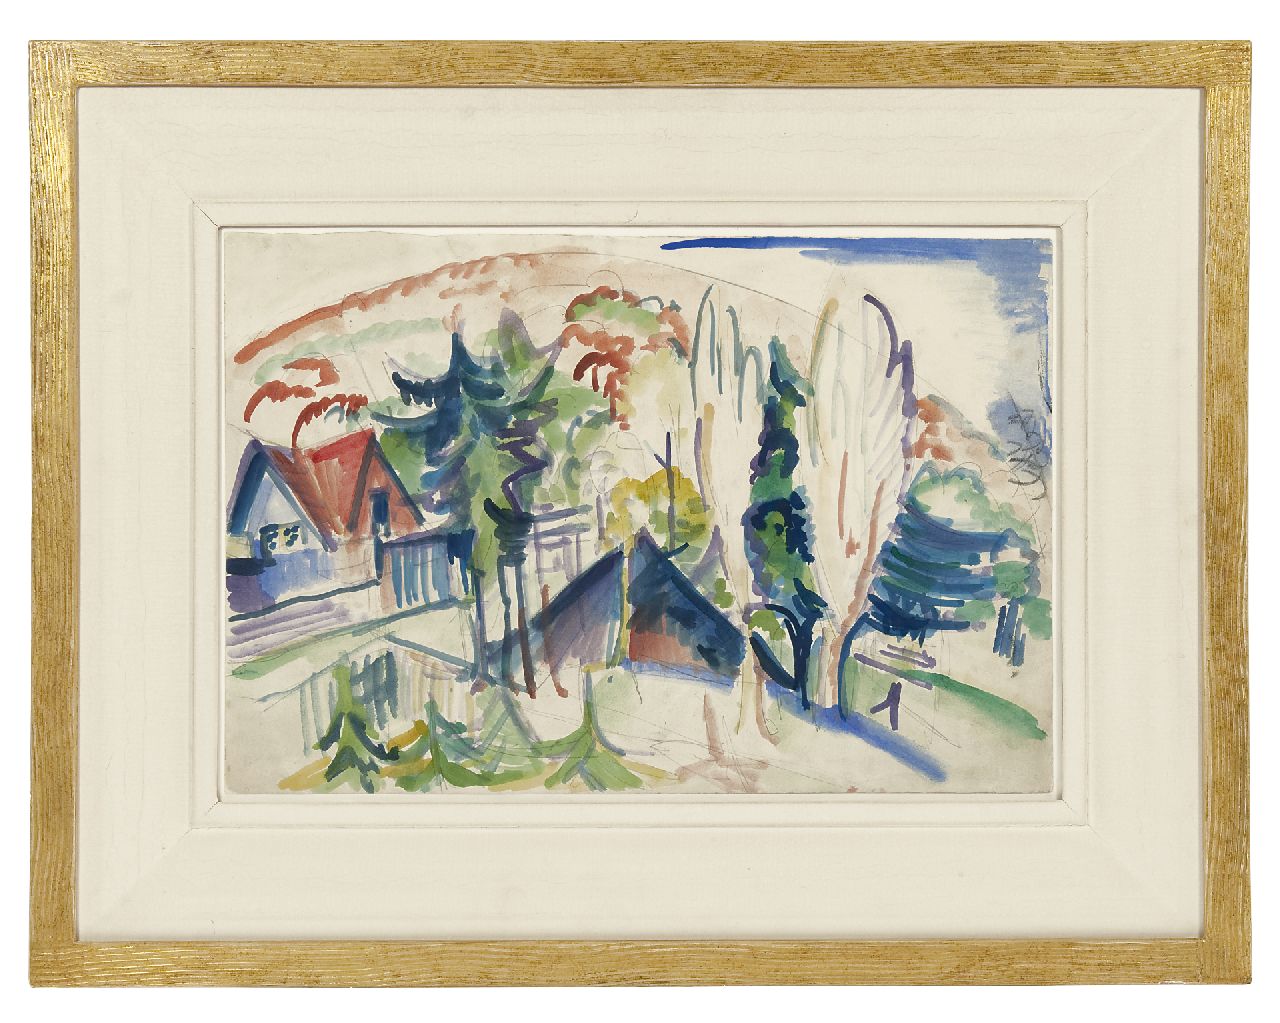 Kirchner E.L.  | Ernst Ludwig Kirchner, A village in the Taunus mountains, Germany, pencil, chalk and watercolour on paper 38.3 x 56.6 cm, painted 1916